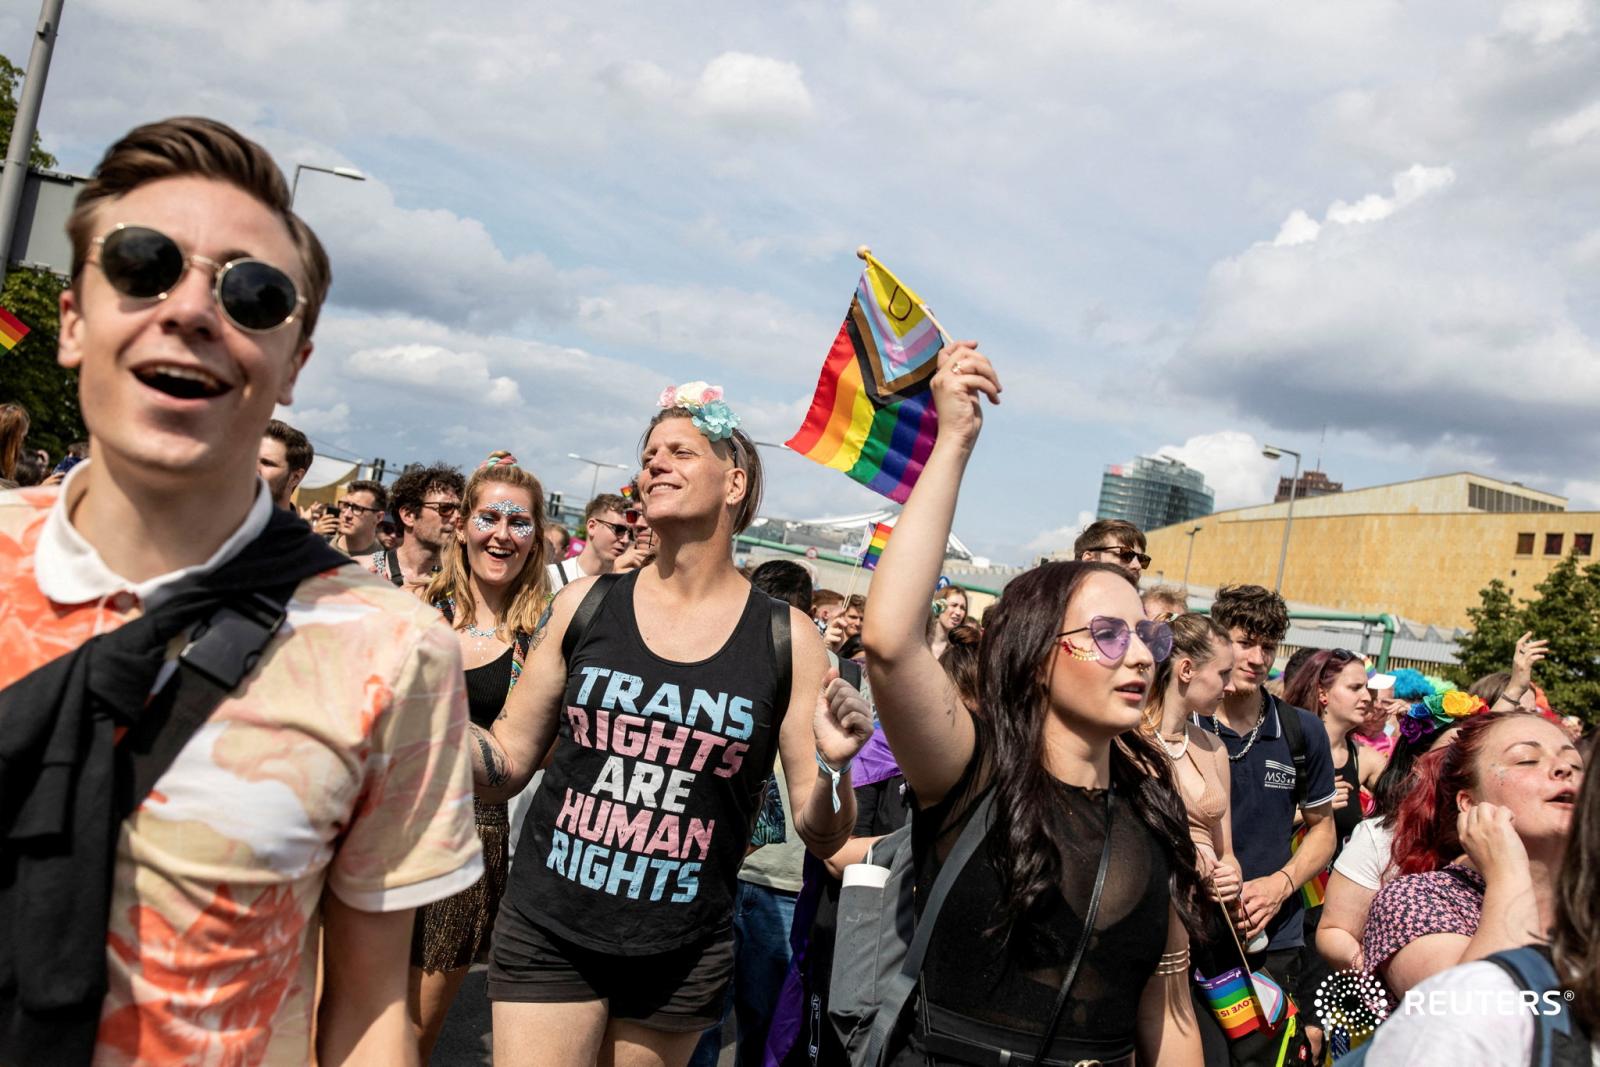 German LGBTQ activist warns over 'worrying' hate crime rise for REUTERS - Anastasia Biefang, 49, prominent German LGBTQ+ rights...